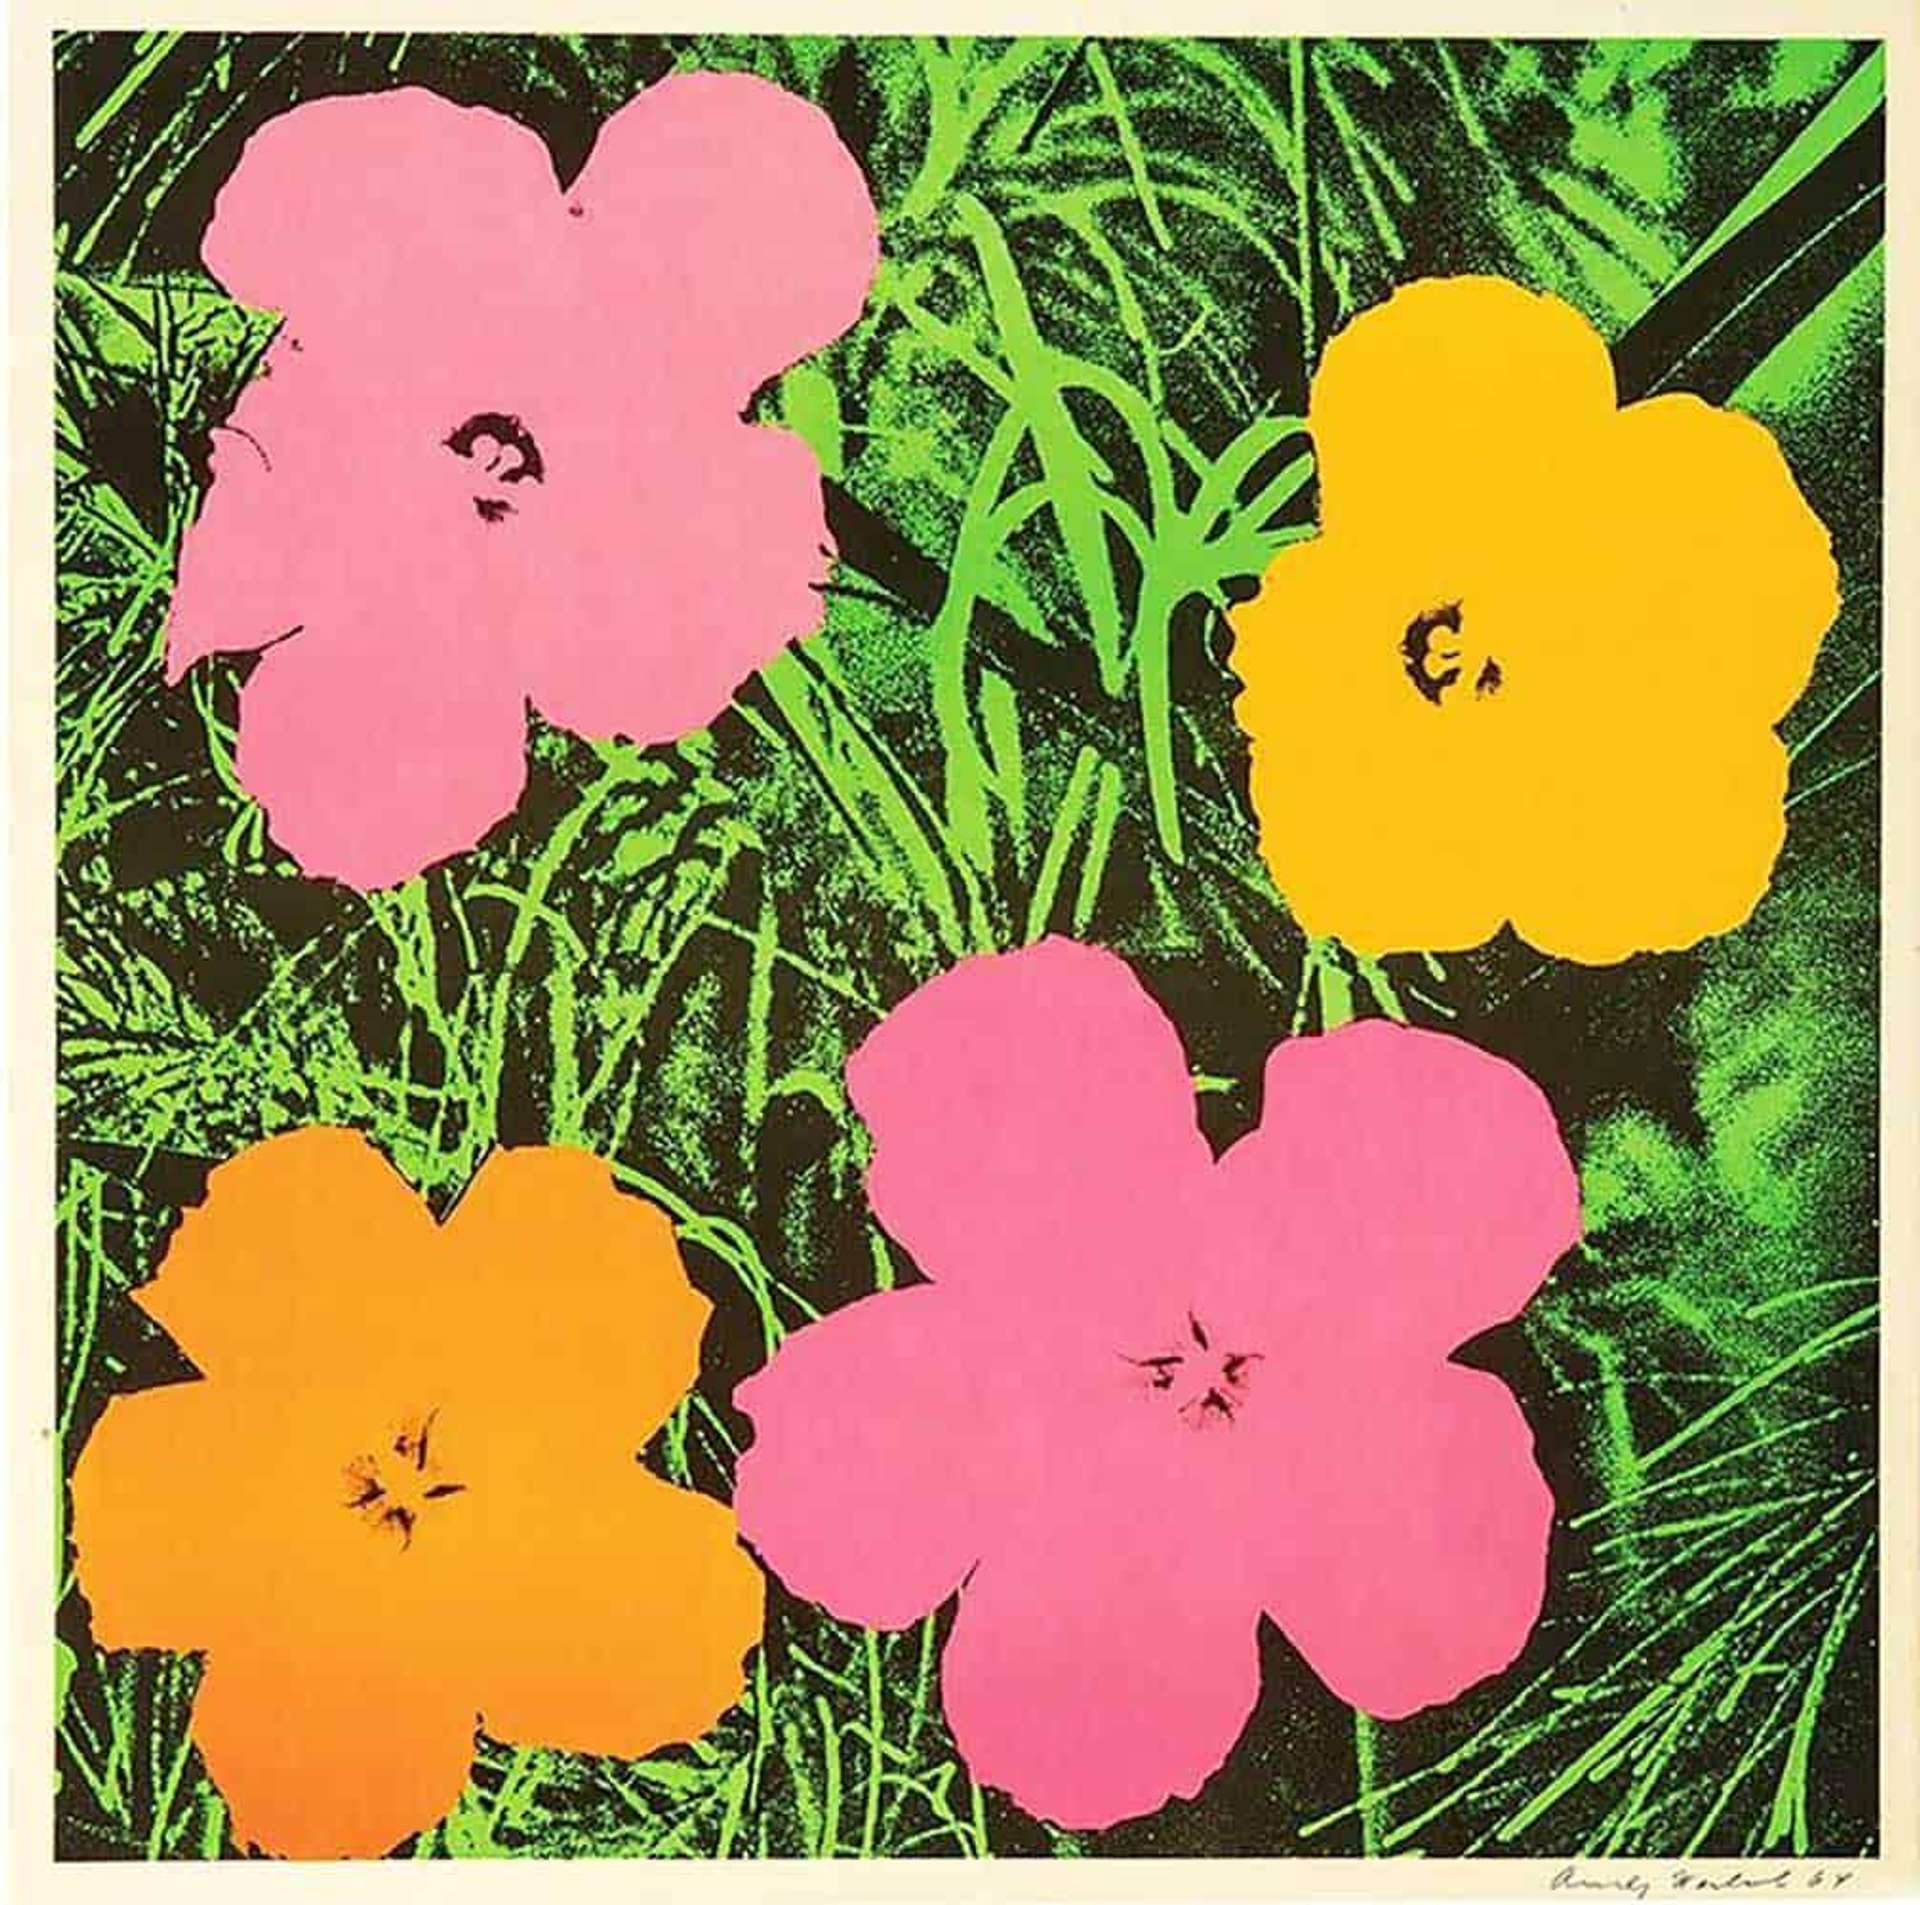 Four screen printed flowers against a background of green grass. The flowers vary in sizes, and are block coloured in orange, pink and yellow.